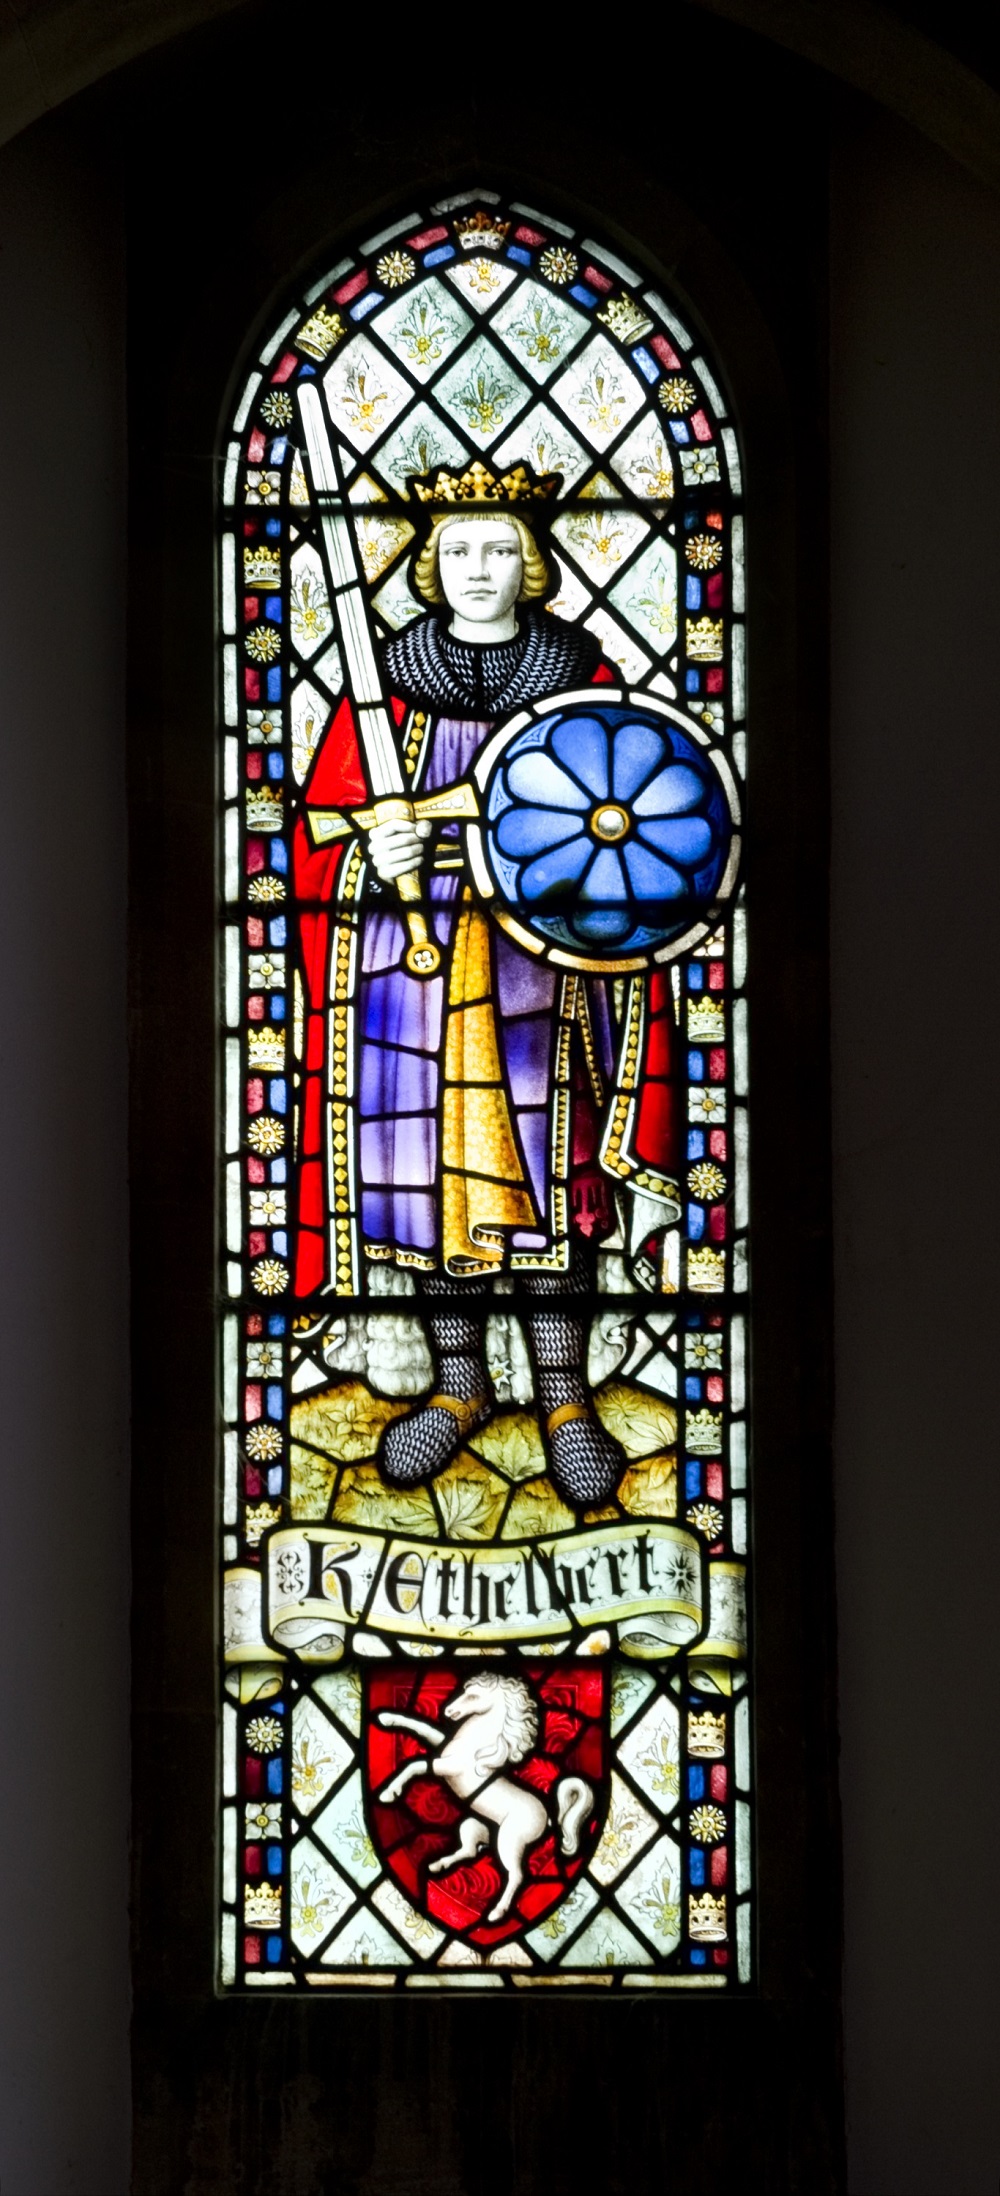 A wonderful detailed view of the stained glass window showing King Ethelbert in St Mary's Church, Herne Bay, Kent